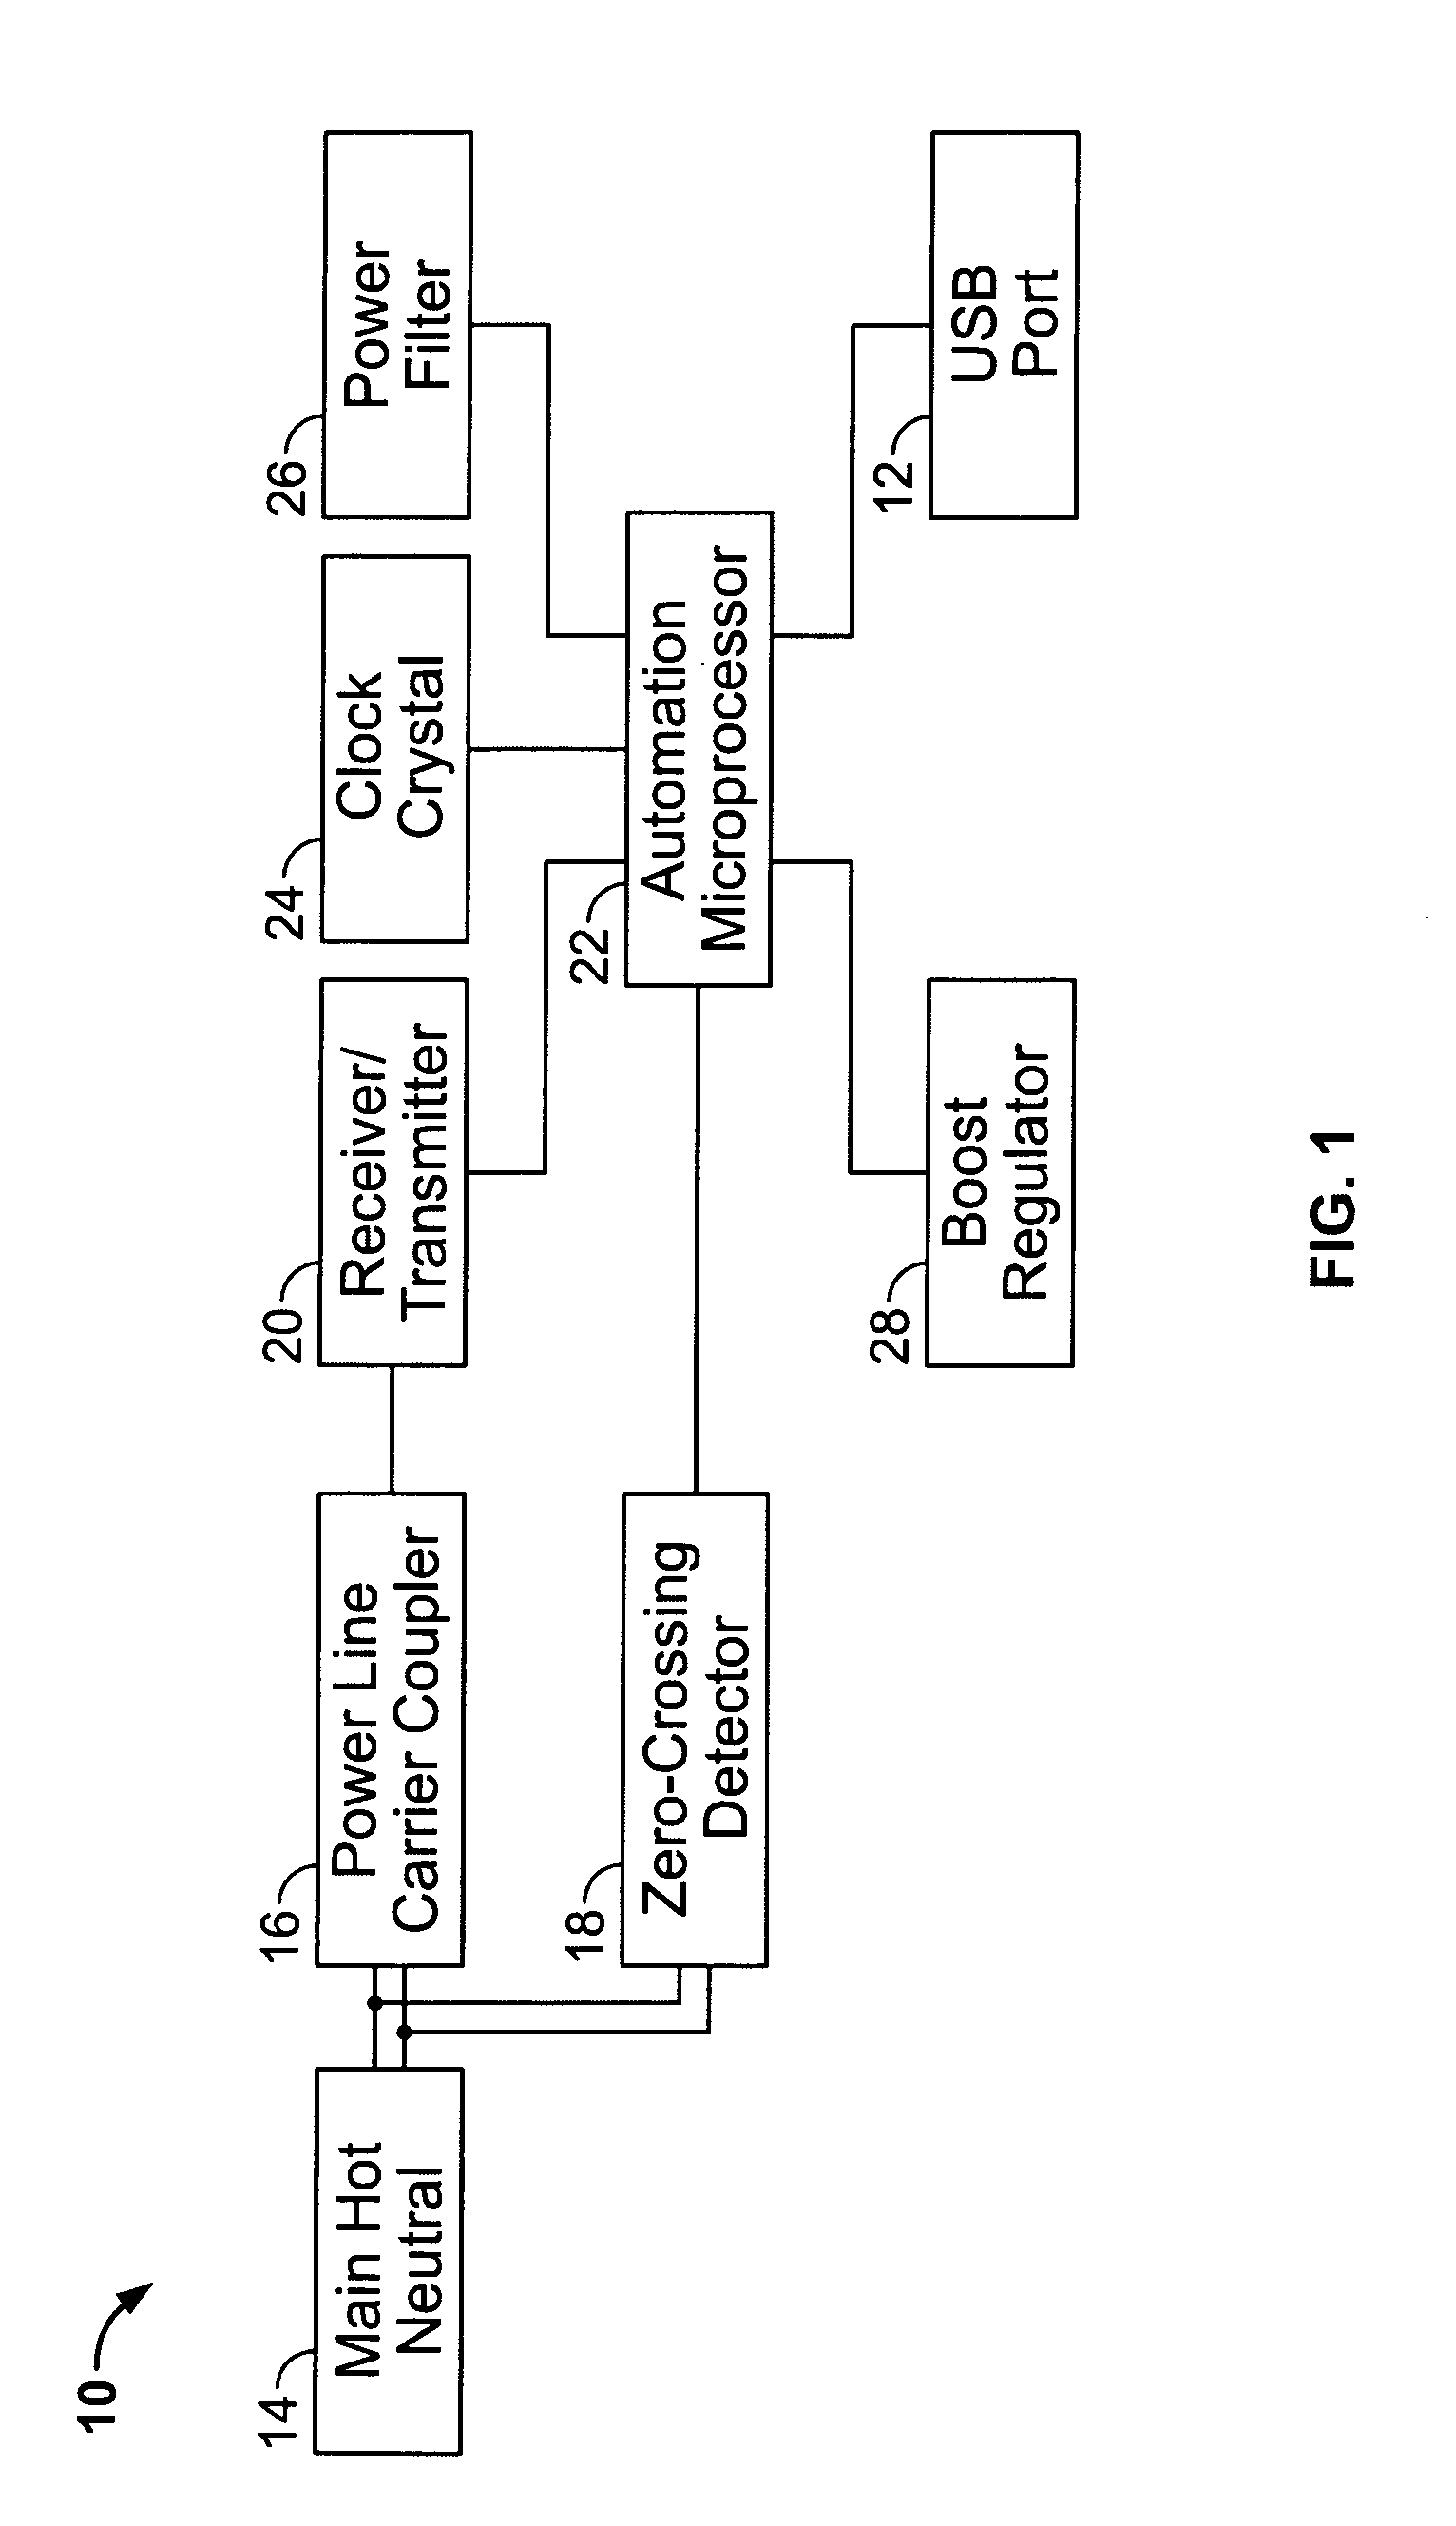 Home automation module having externally powered communications port